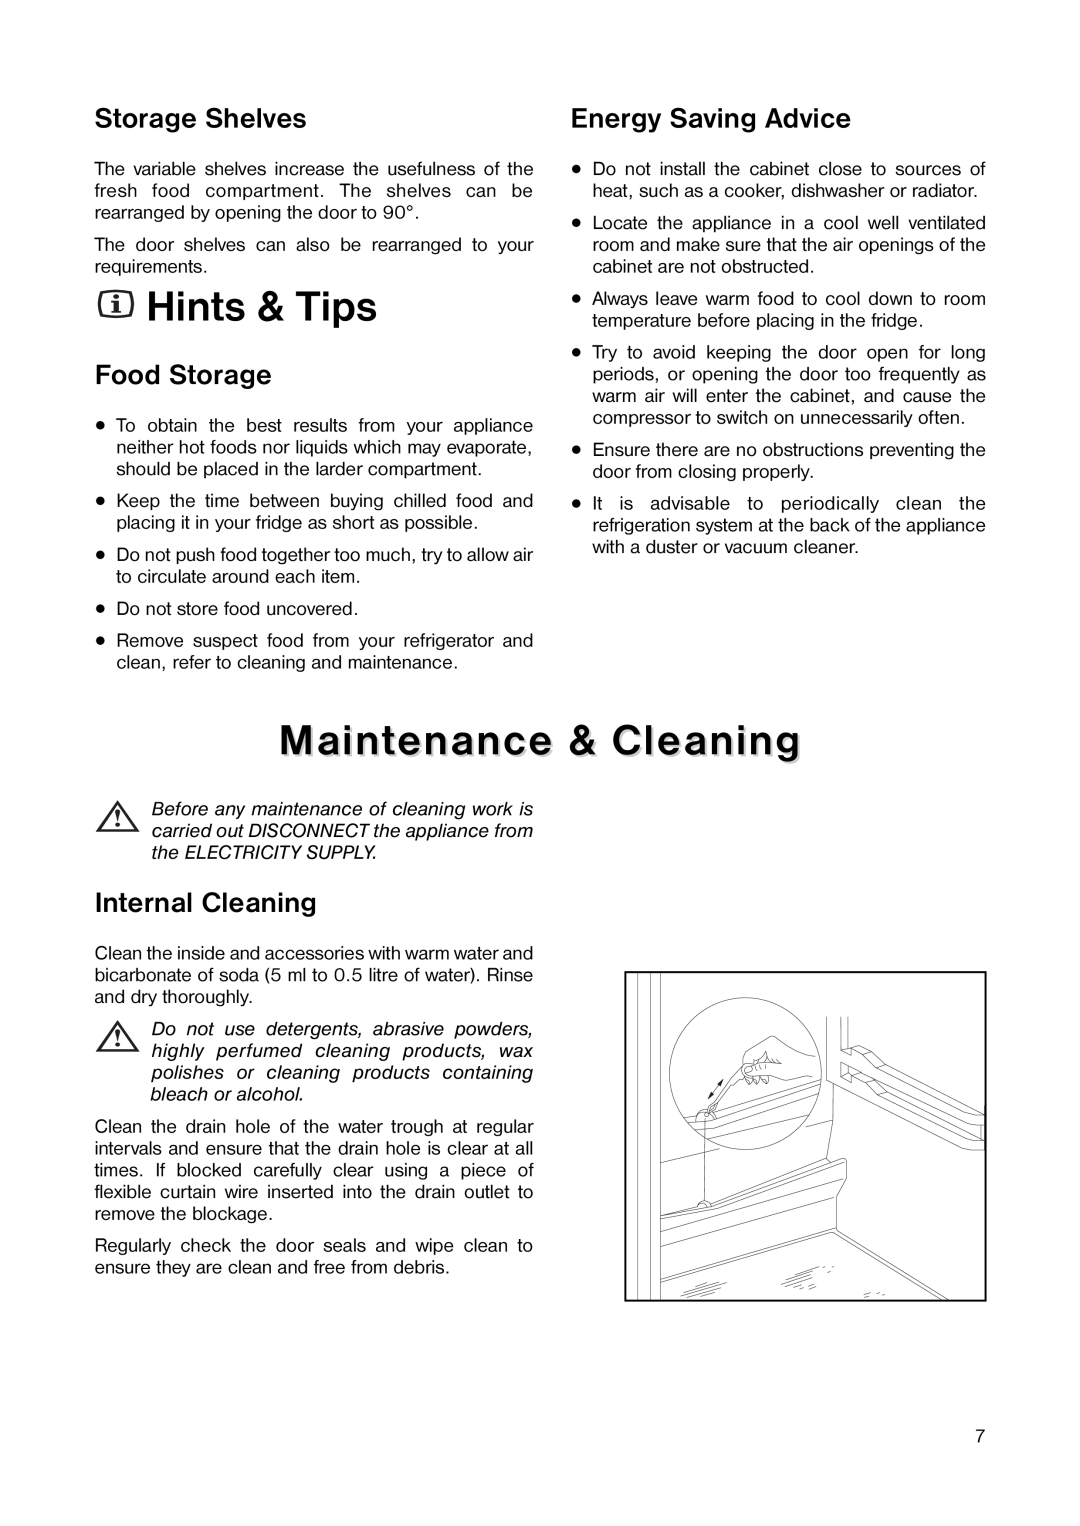 Zanussi ZCL 56 manual Hints & Tips, Maintenance & Cleaning, Storage Shelves, Food Storage, Internal Cleaning 